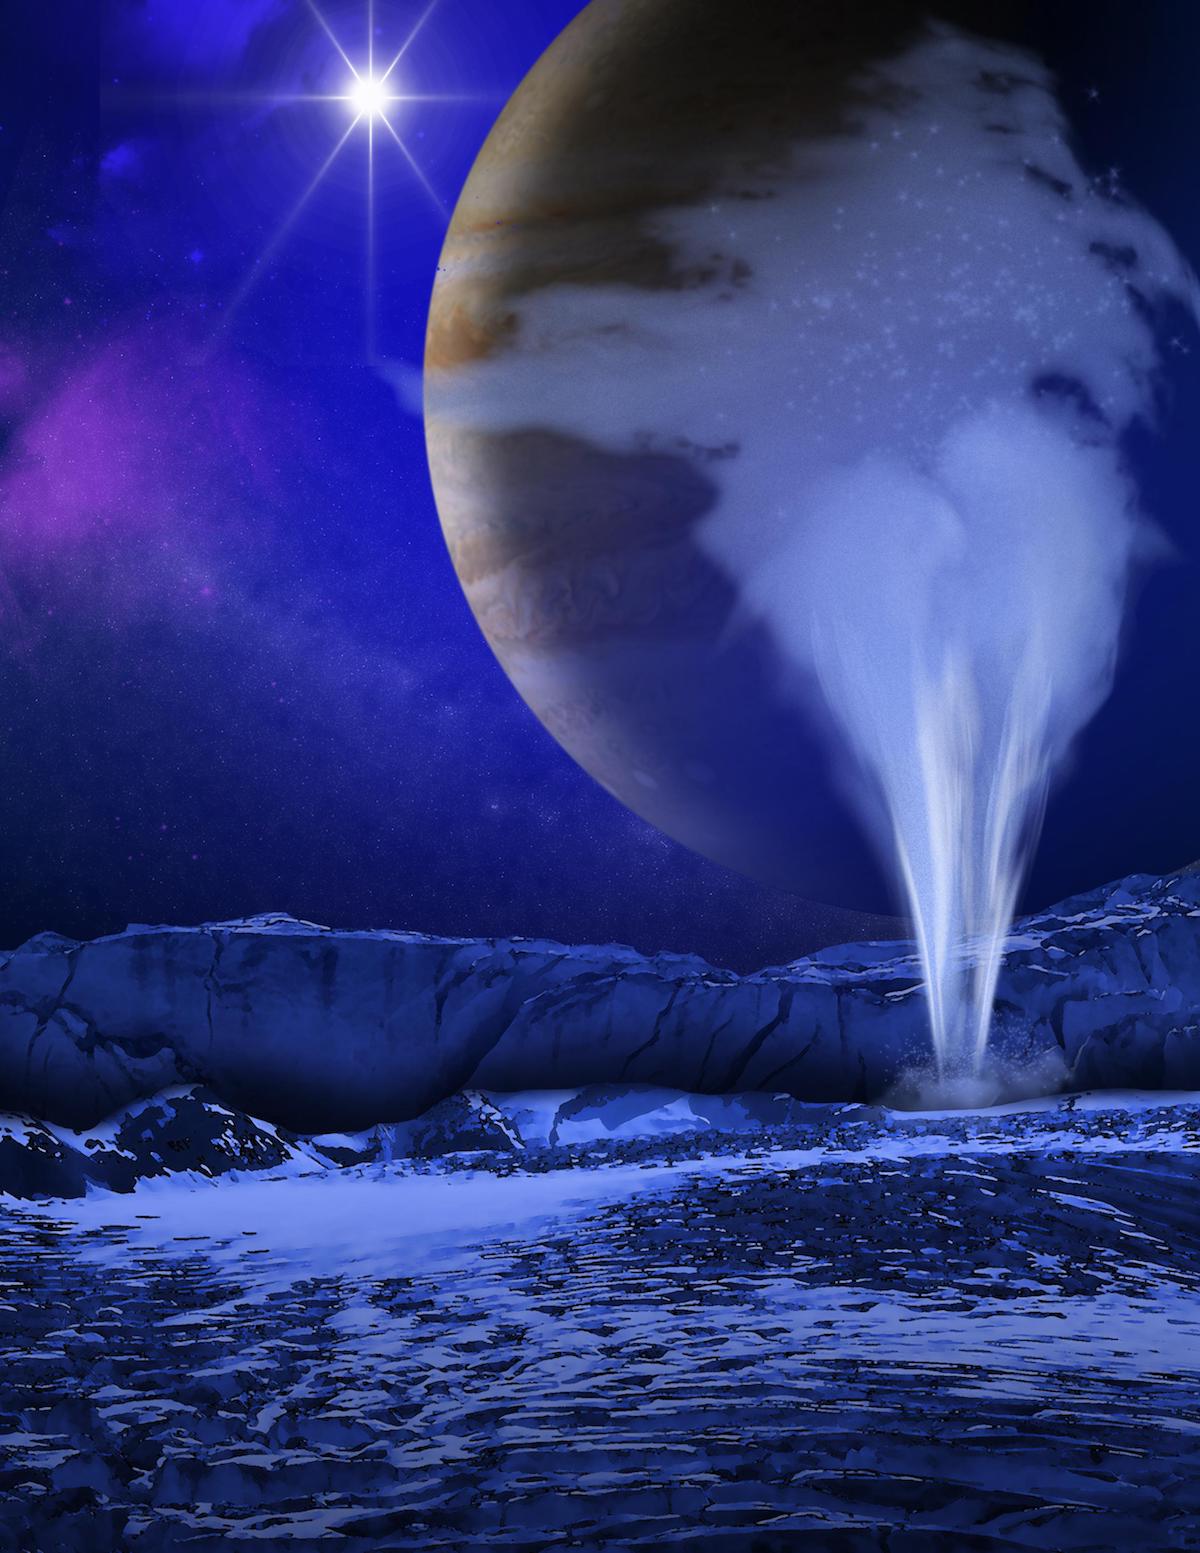 plume erupting from icy surface with Jupiter in the sky